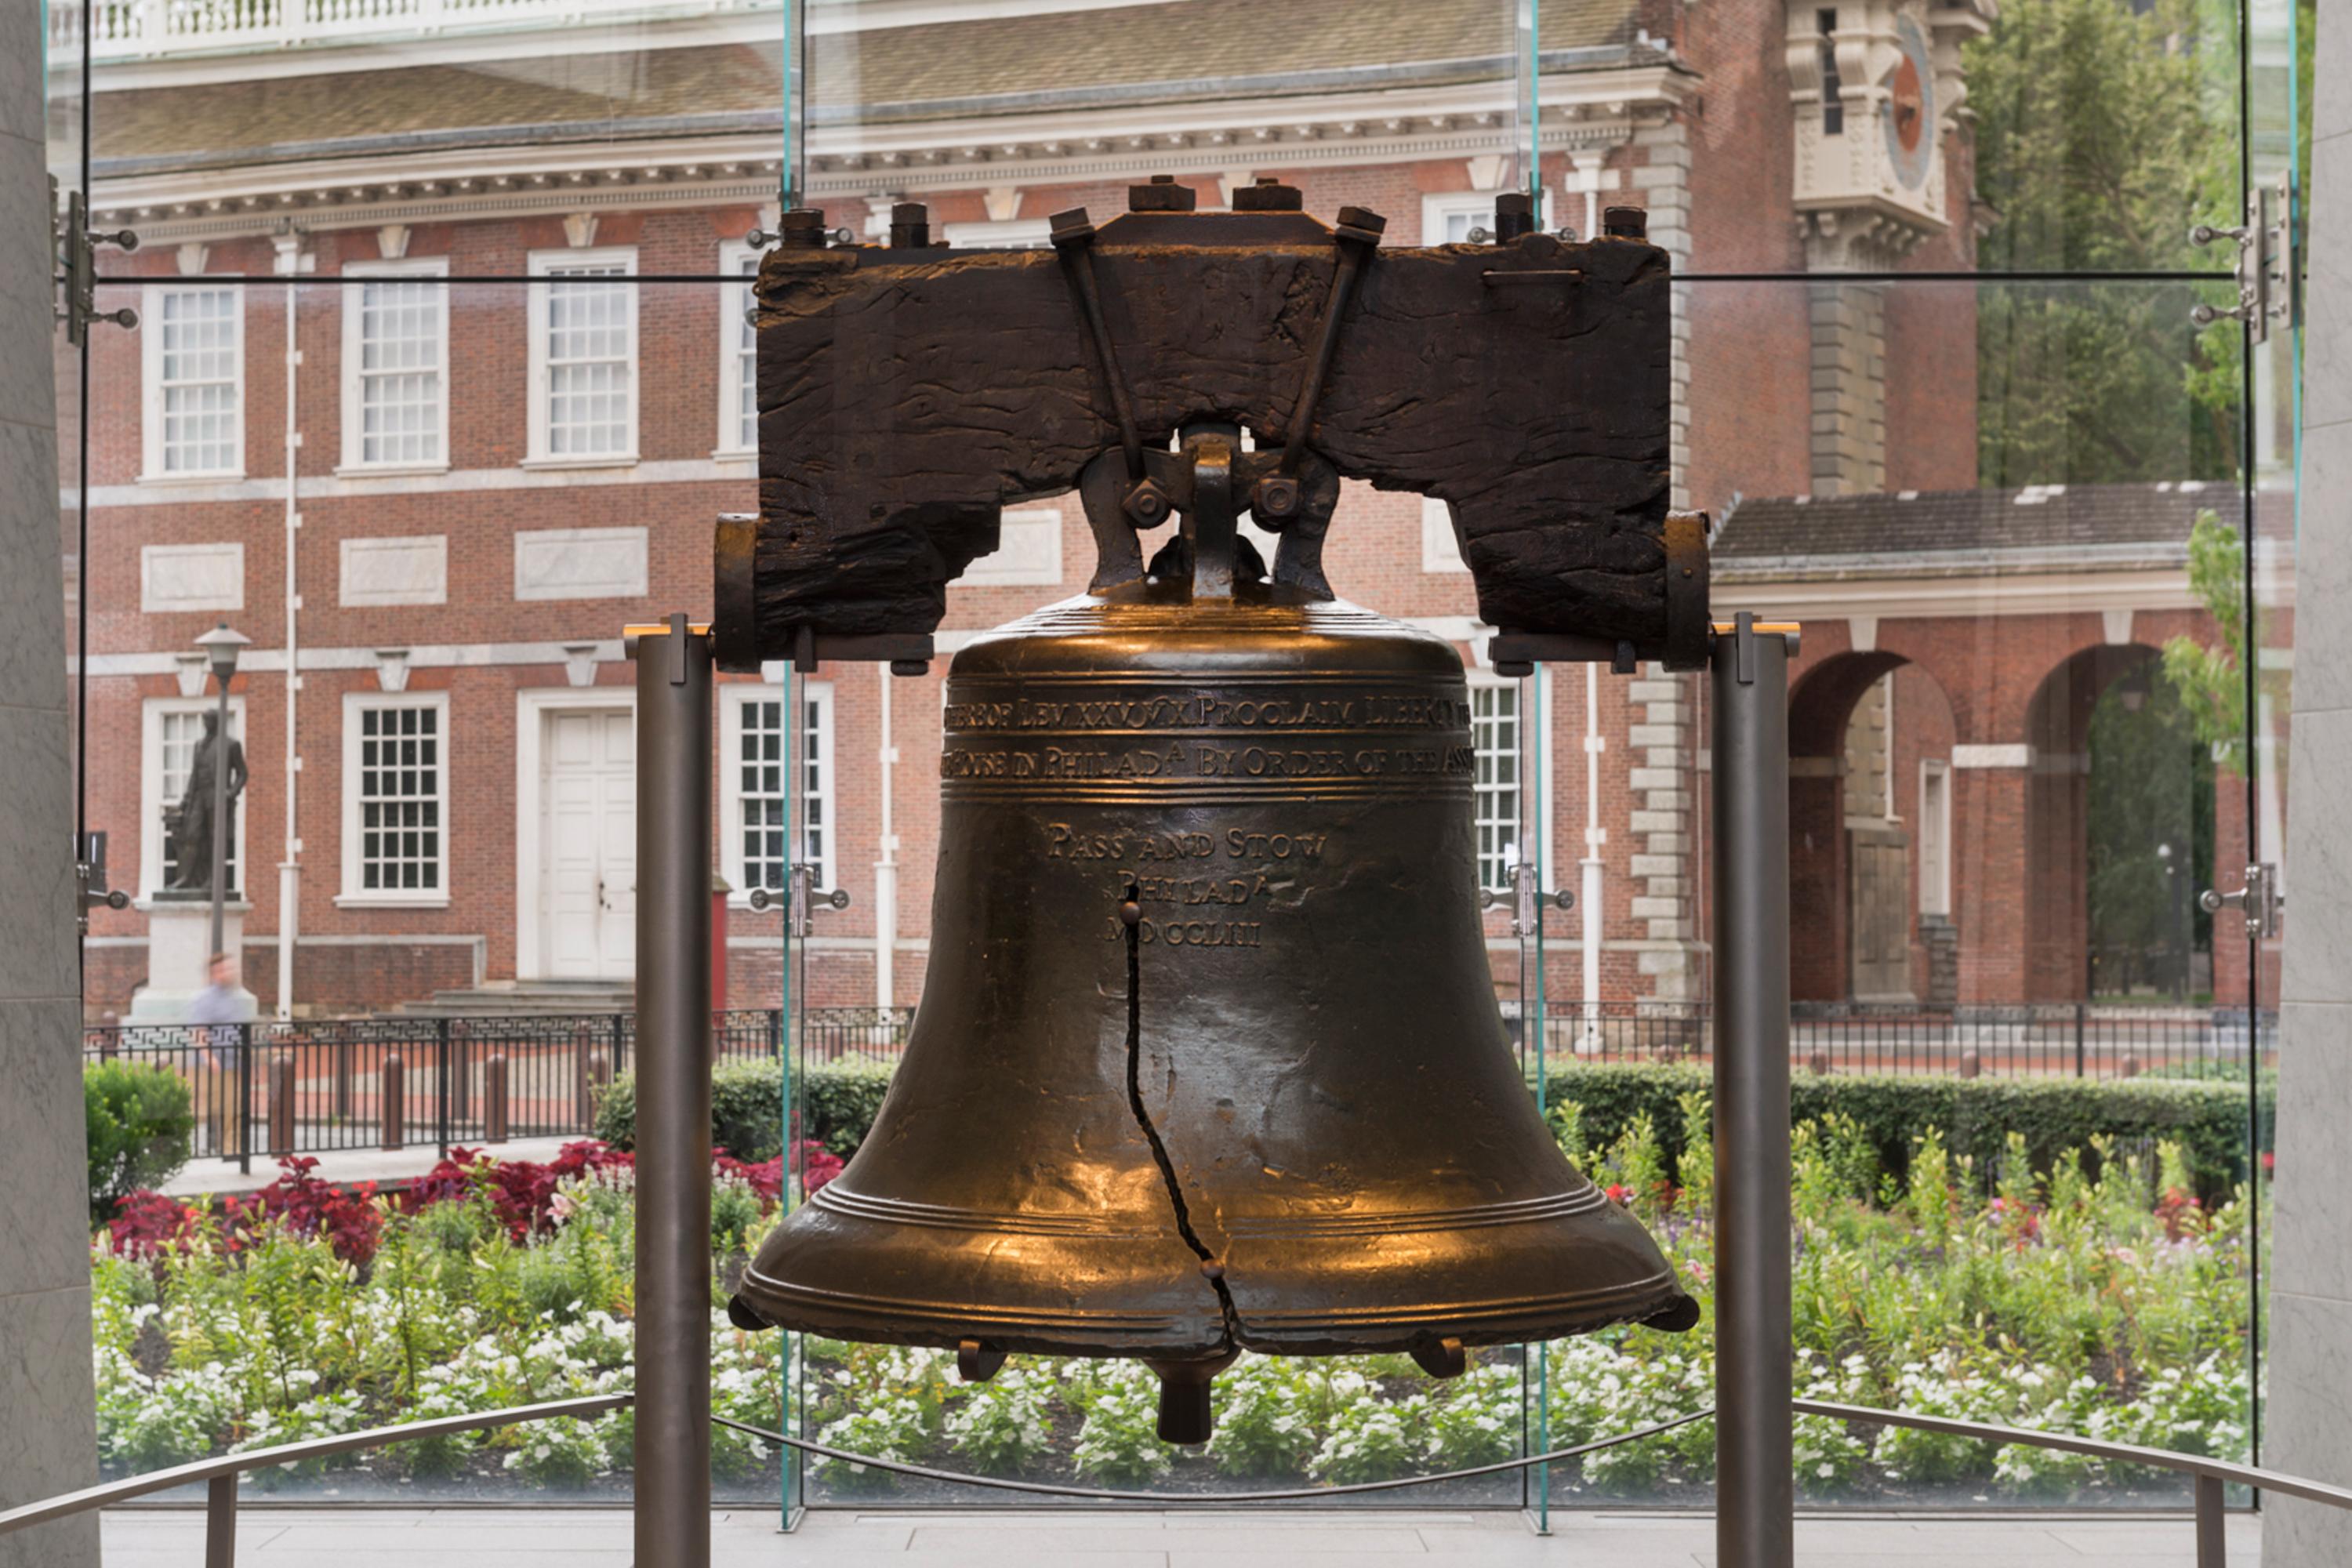 Color photo of the Liberty Bell with Independence Hall in the background.